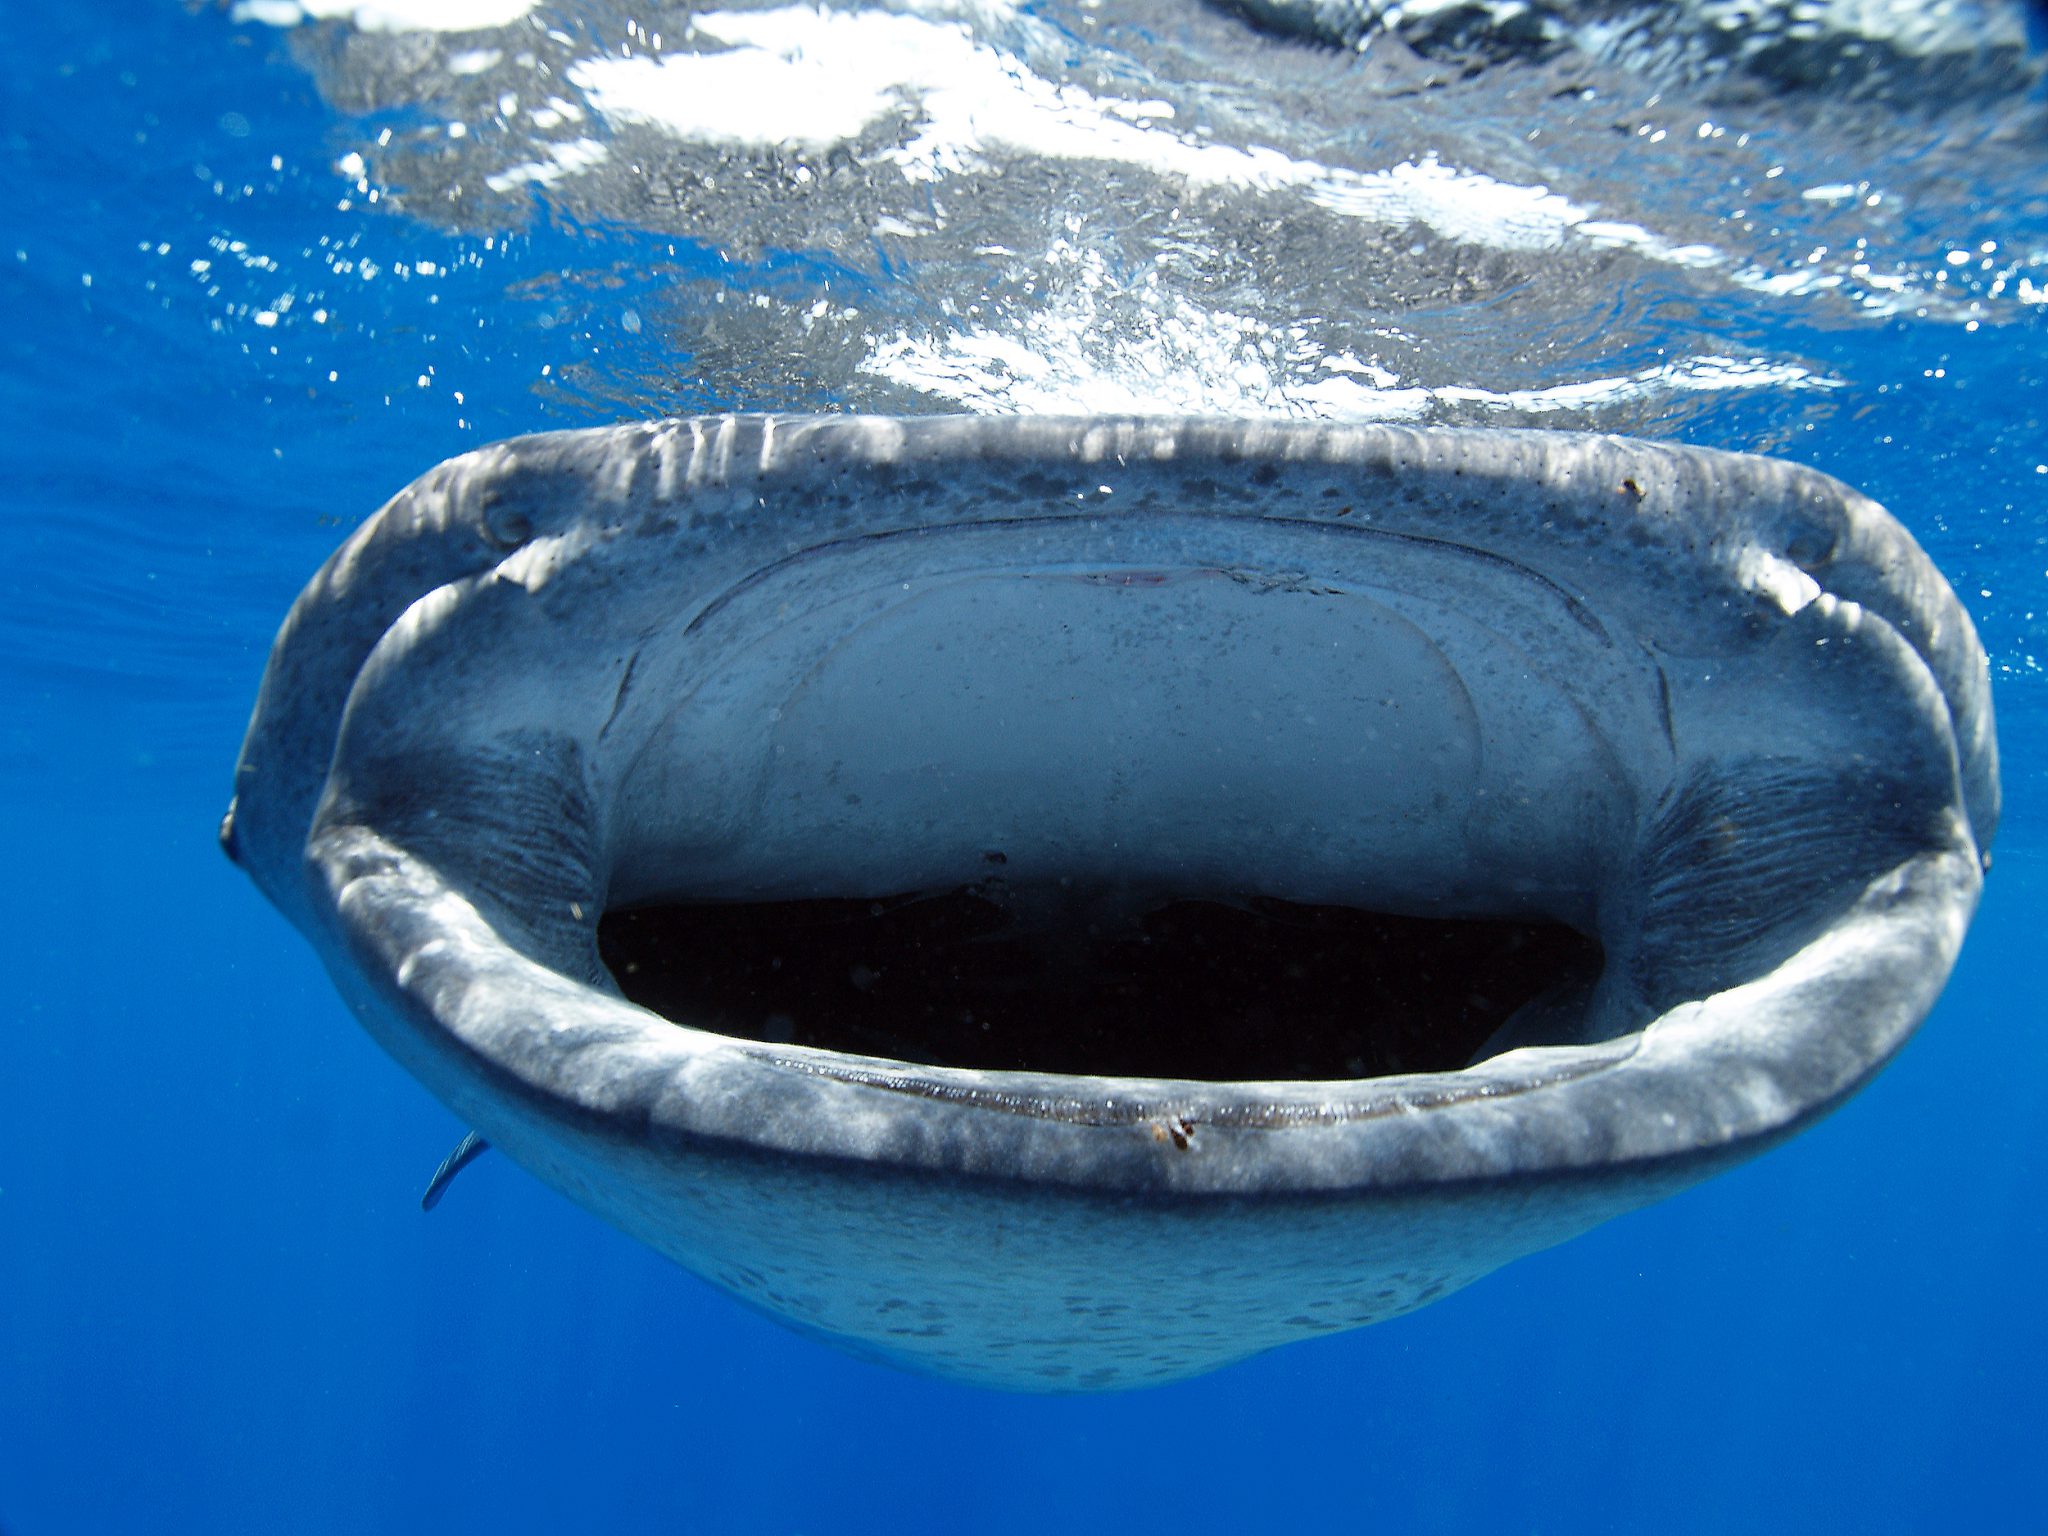 A close-up view of the inside of a whale shark's mouth - fortunately these giants only eat small fish, shrimp and plankton